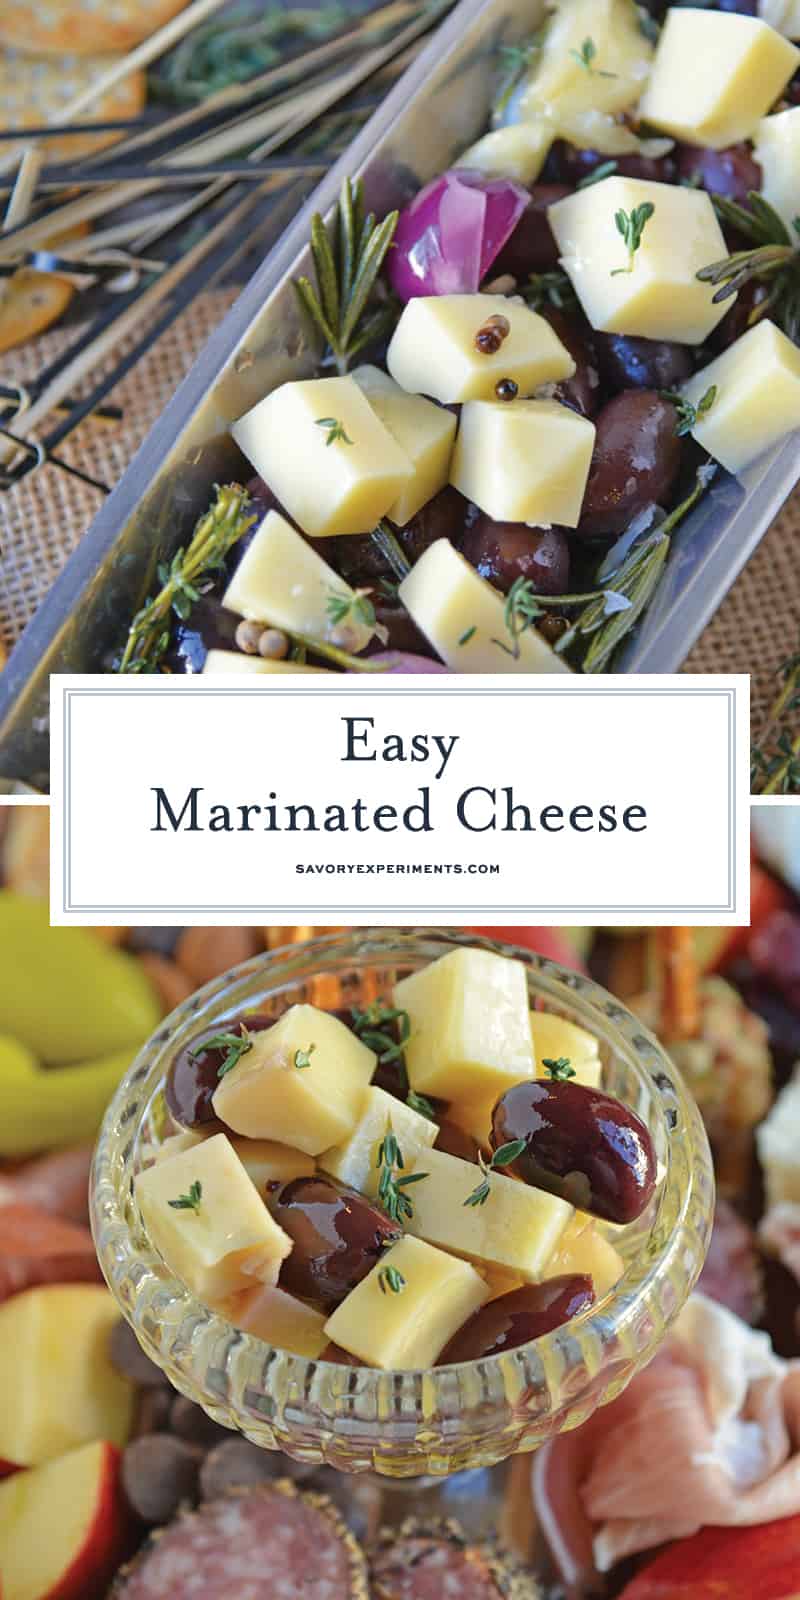 Marinated Cheese is the perfect hostess or homemade holiday gift. Simple and tasty, it also makes an easy party appetizer! #marinatedcheese #easypartyappetizers #homemadegifts www.savoryexperiments.com 